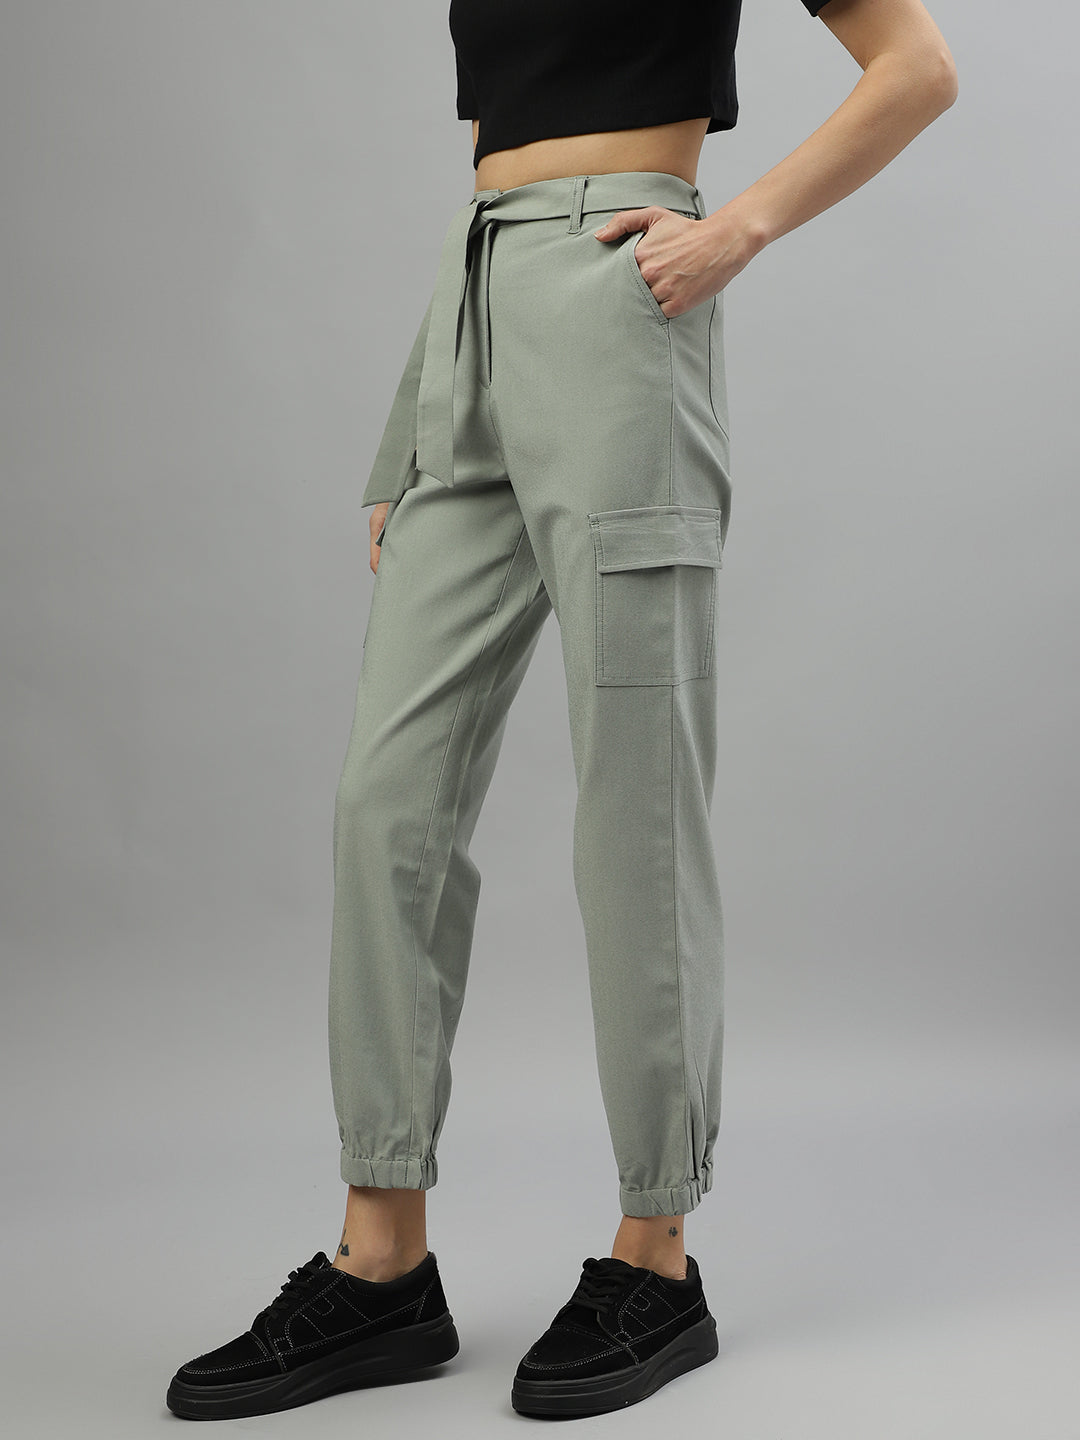 Test Drive - Cargo Tracksuit Bottoms for Women | RVCA